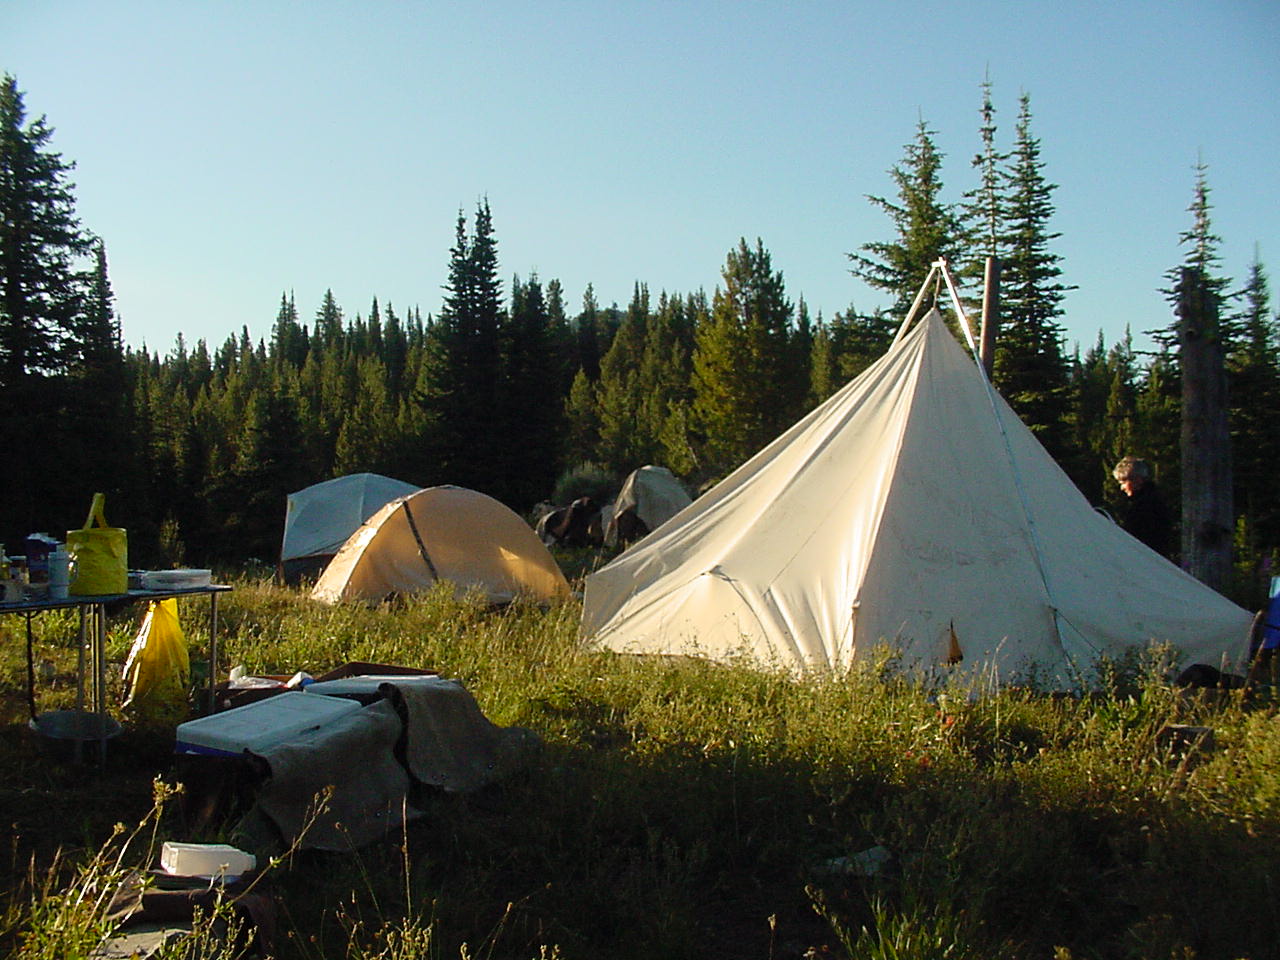 Wilderness camp with wall tents, tables and other gear